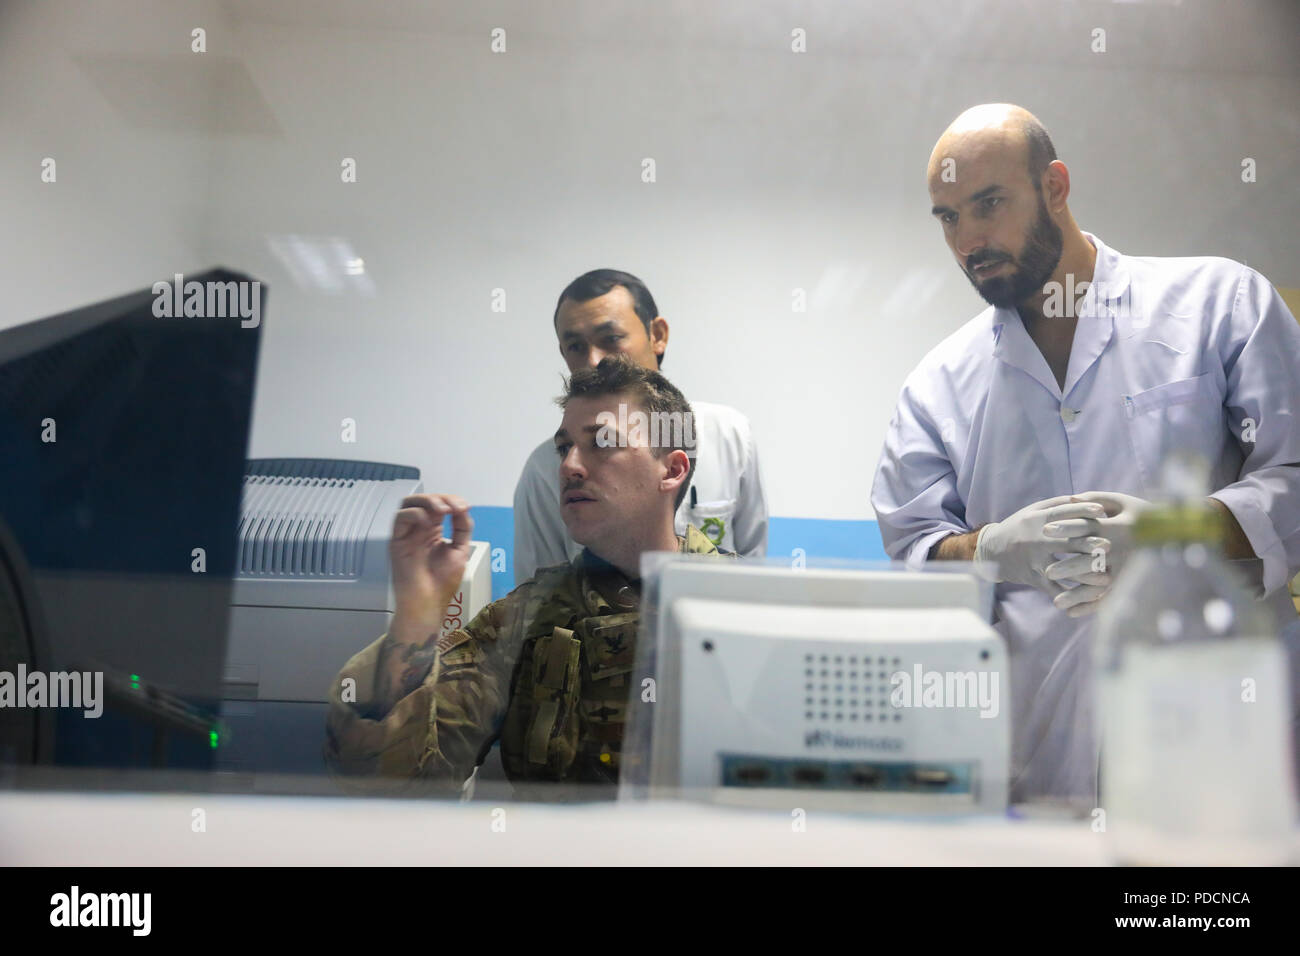 KANDAHAR PROVINCE, Afghanistan (August 5, 2018) -- U.S. Navy Hospital Corpsman 3rd Class Thomas Fite, a radiology technician for Kandahar Airfield NATO Role III Multinational Medical Unit, looks over results of an x-ray, August 5, 2018, to help his Afghan counterparts during a medical advisory visit at Kandahar Regional Military Hospital, Camp Hero in Kandahar, Afghanistan. Staff members from the Role III conduct routine visits to KRMH to train and advice Afghan medical staff. (U.S. Army photo by Staff Sgt. Neysa Canfield/TAAC-South Public Affairs) Stock Photo